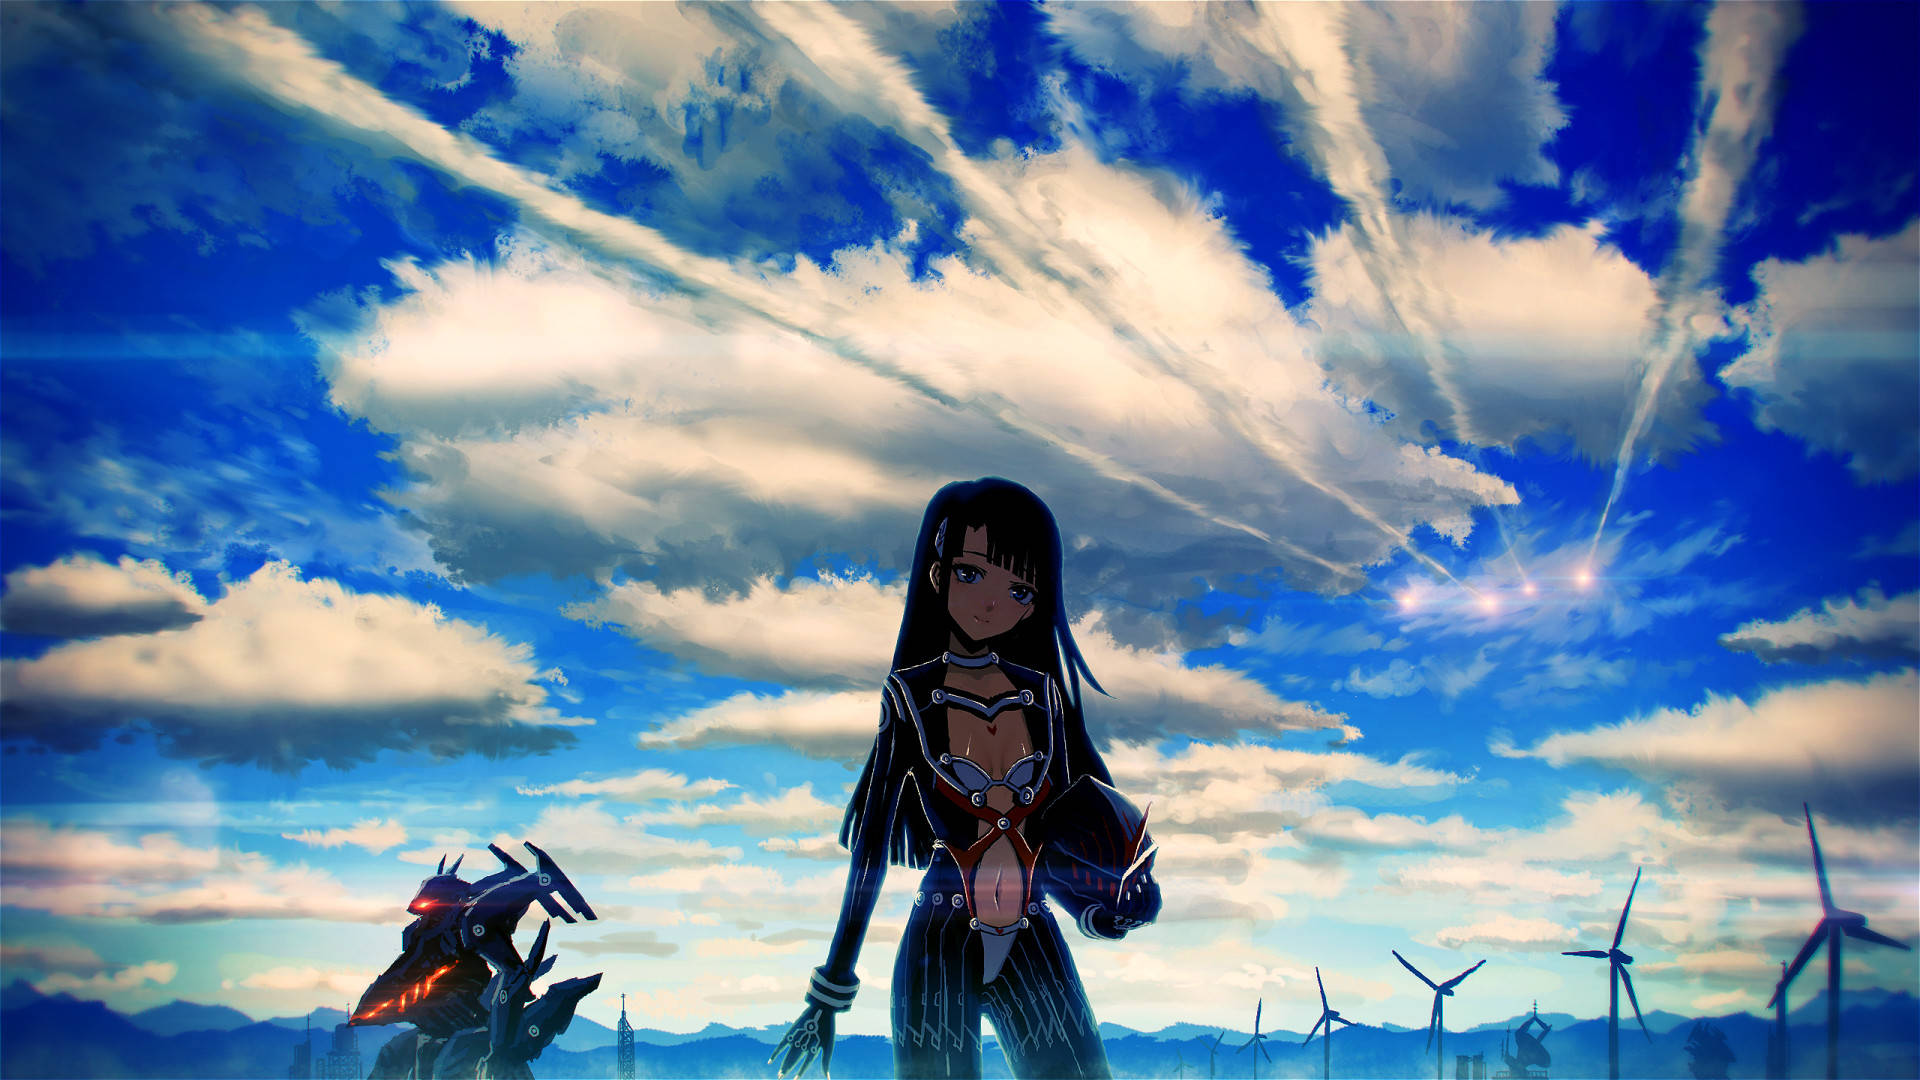 Amazing Anime Cloud With Girl Background